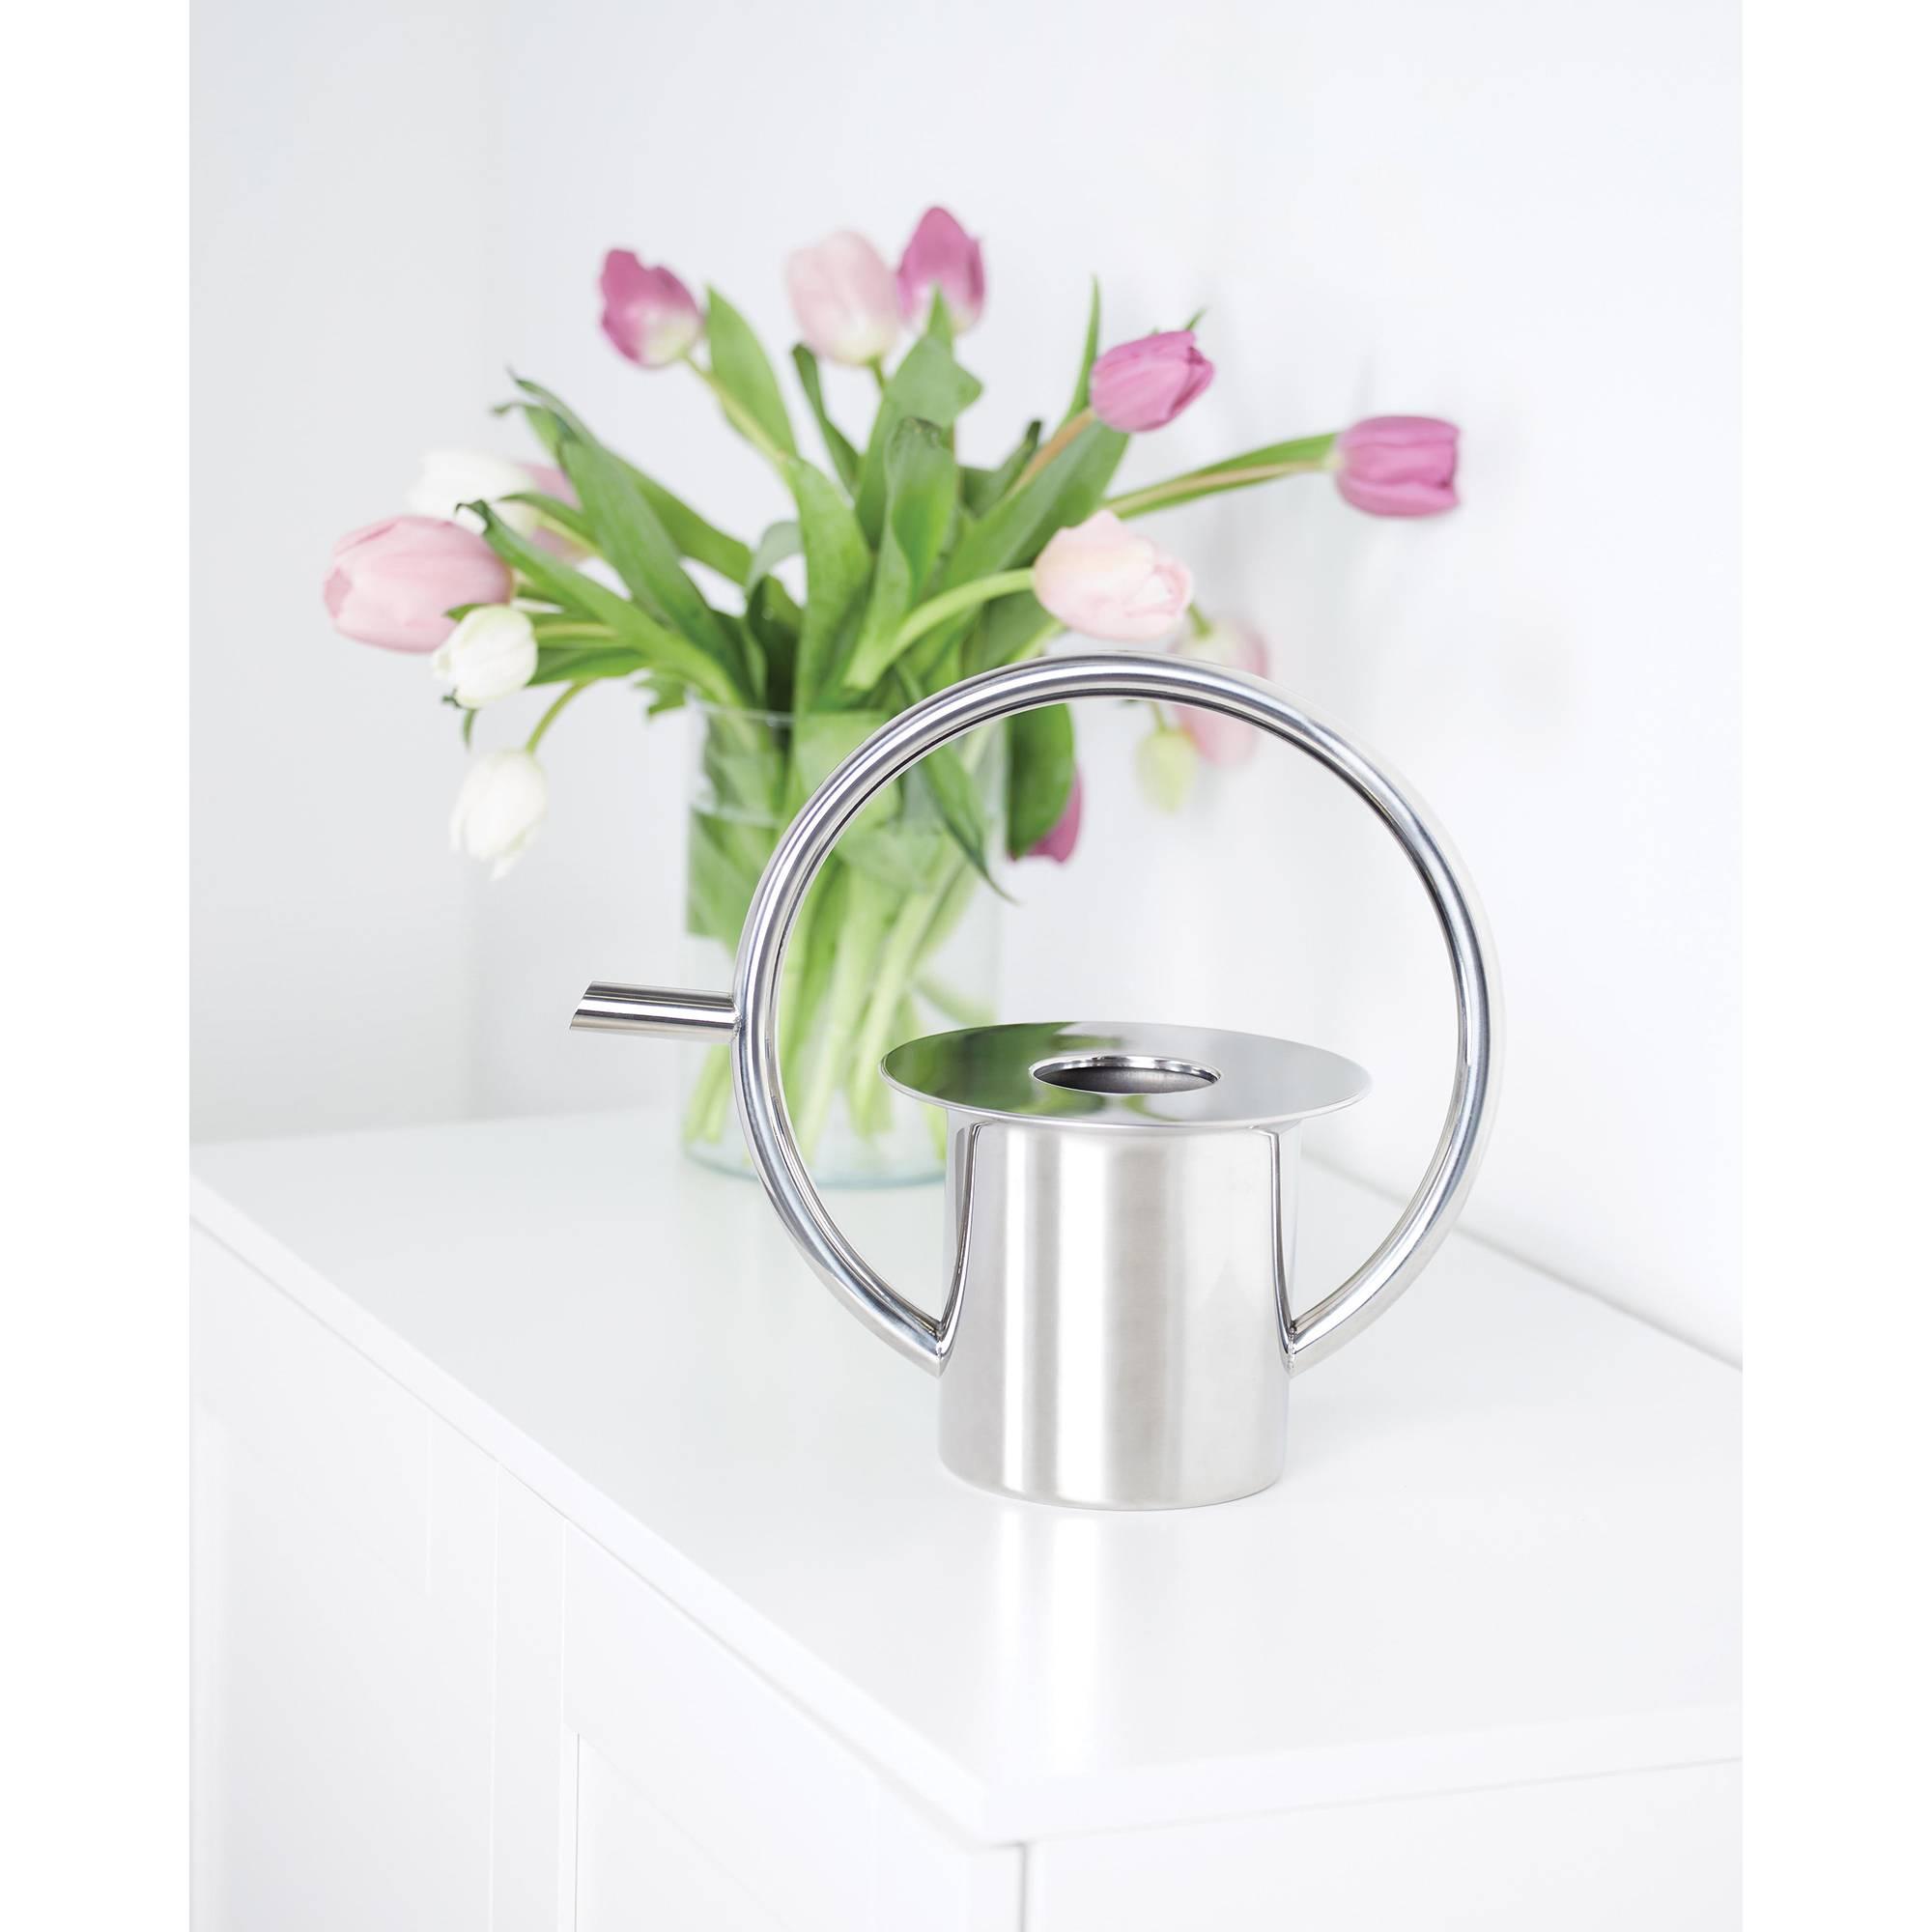 Umbra Quench Stainless Steel Watering Can 1L Image 4